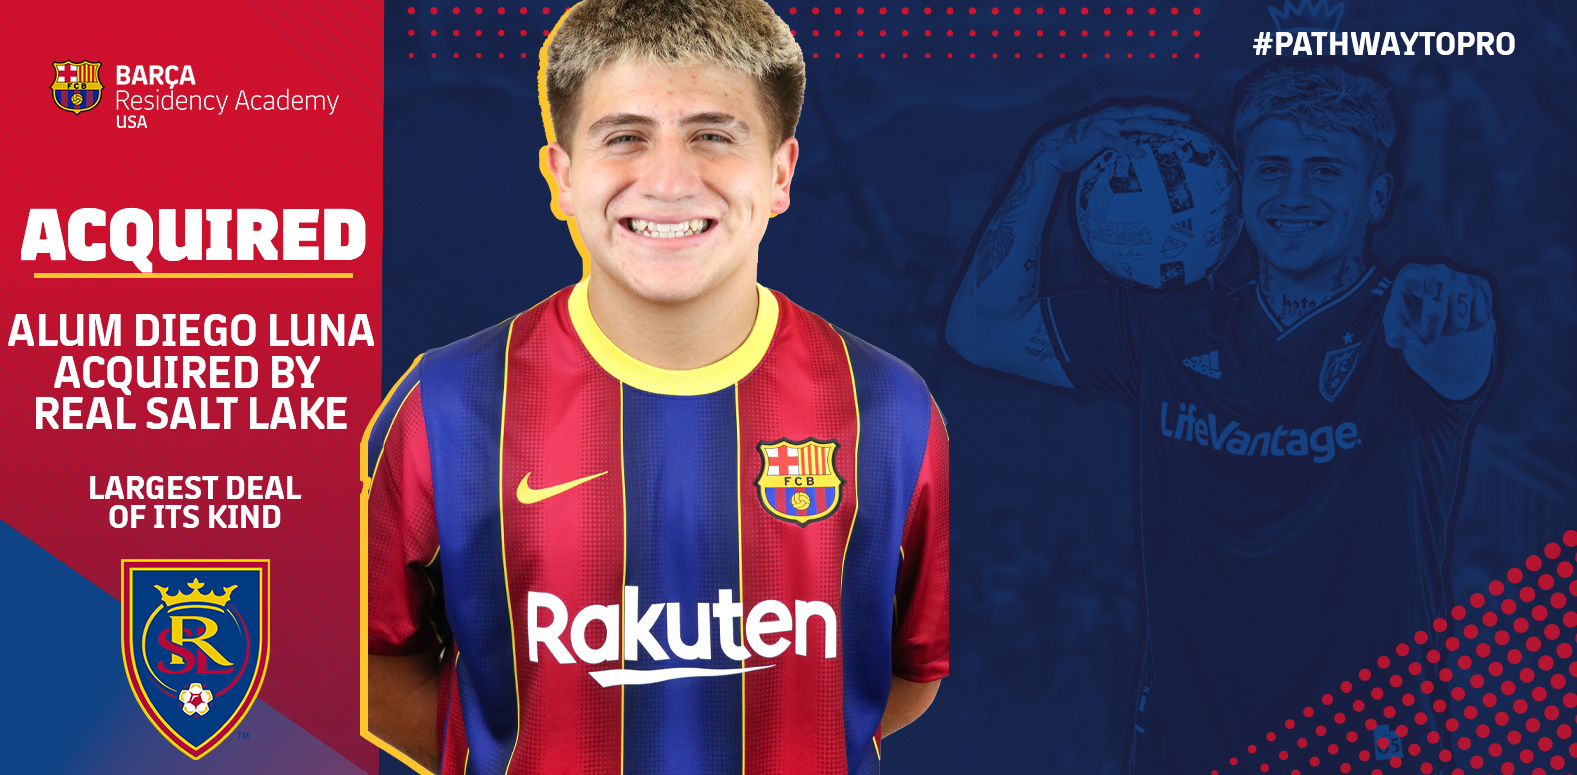 Barca Residency Academy alum Diego Luna Acquired by Real Salt Lake from El Paso Locomotive